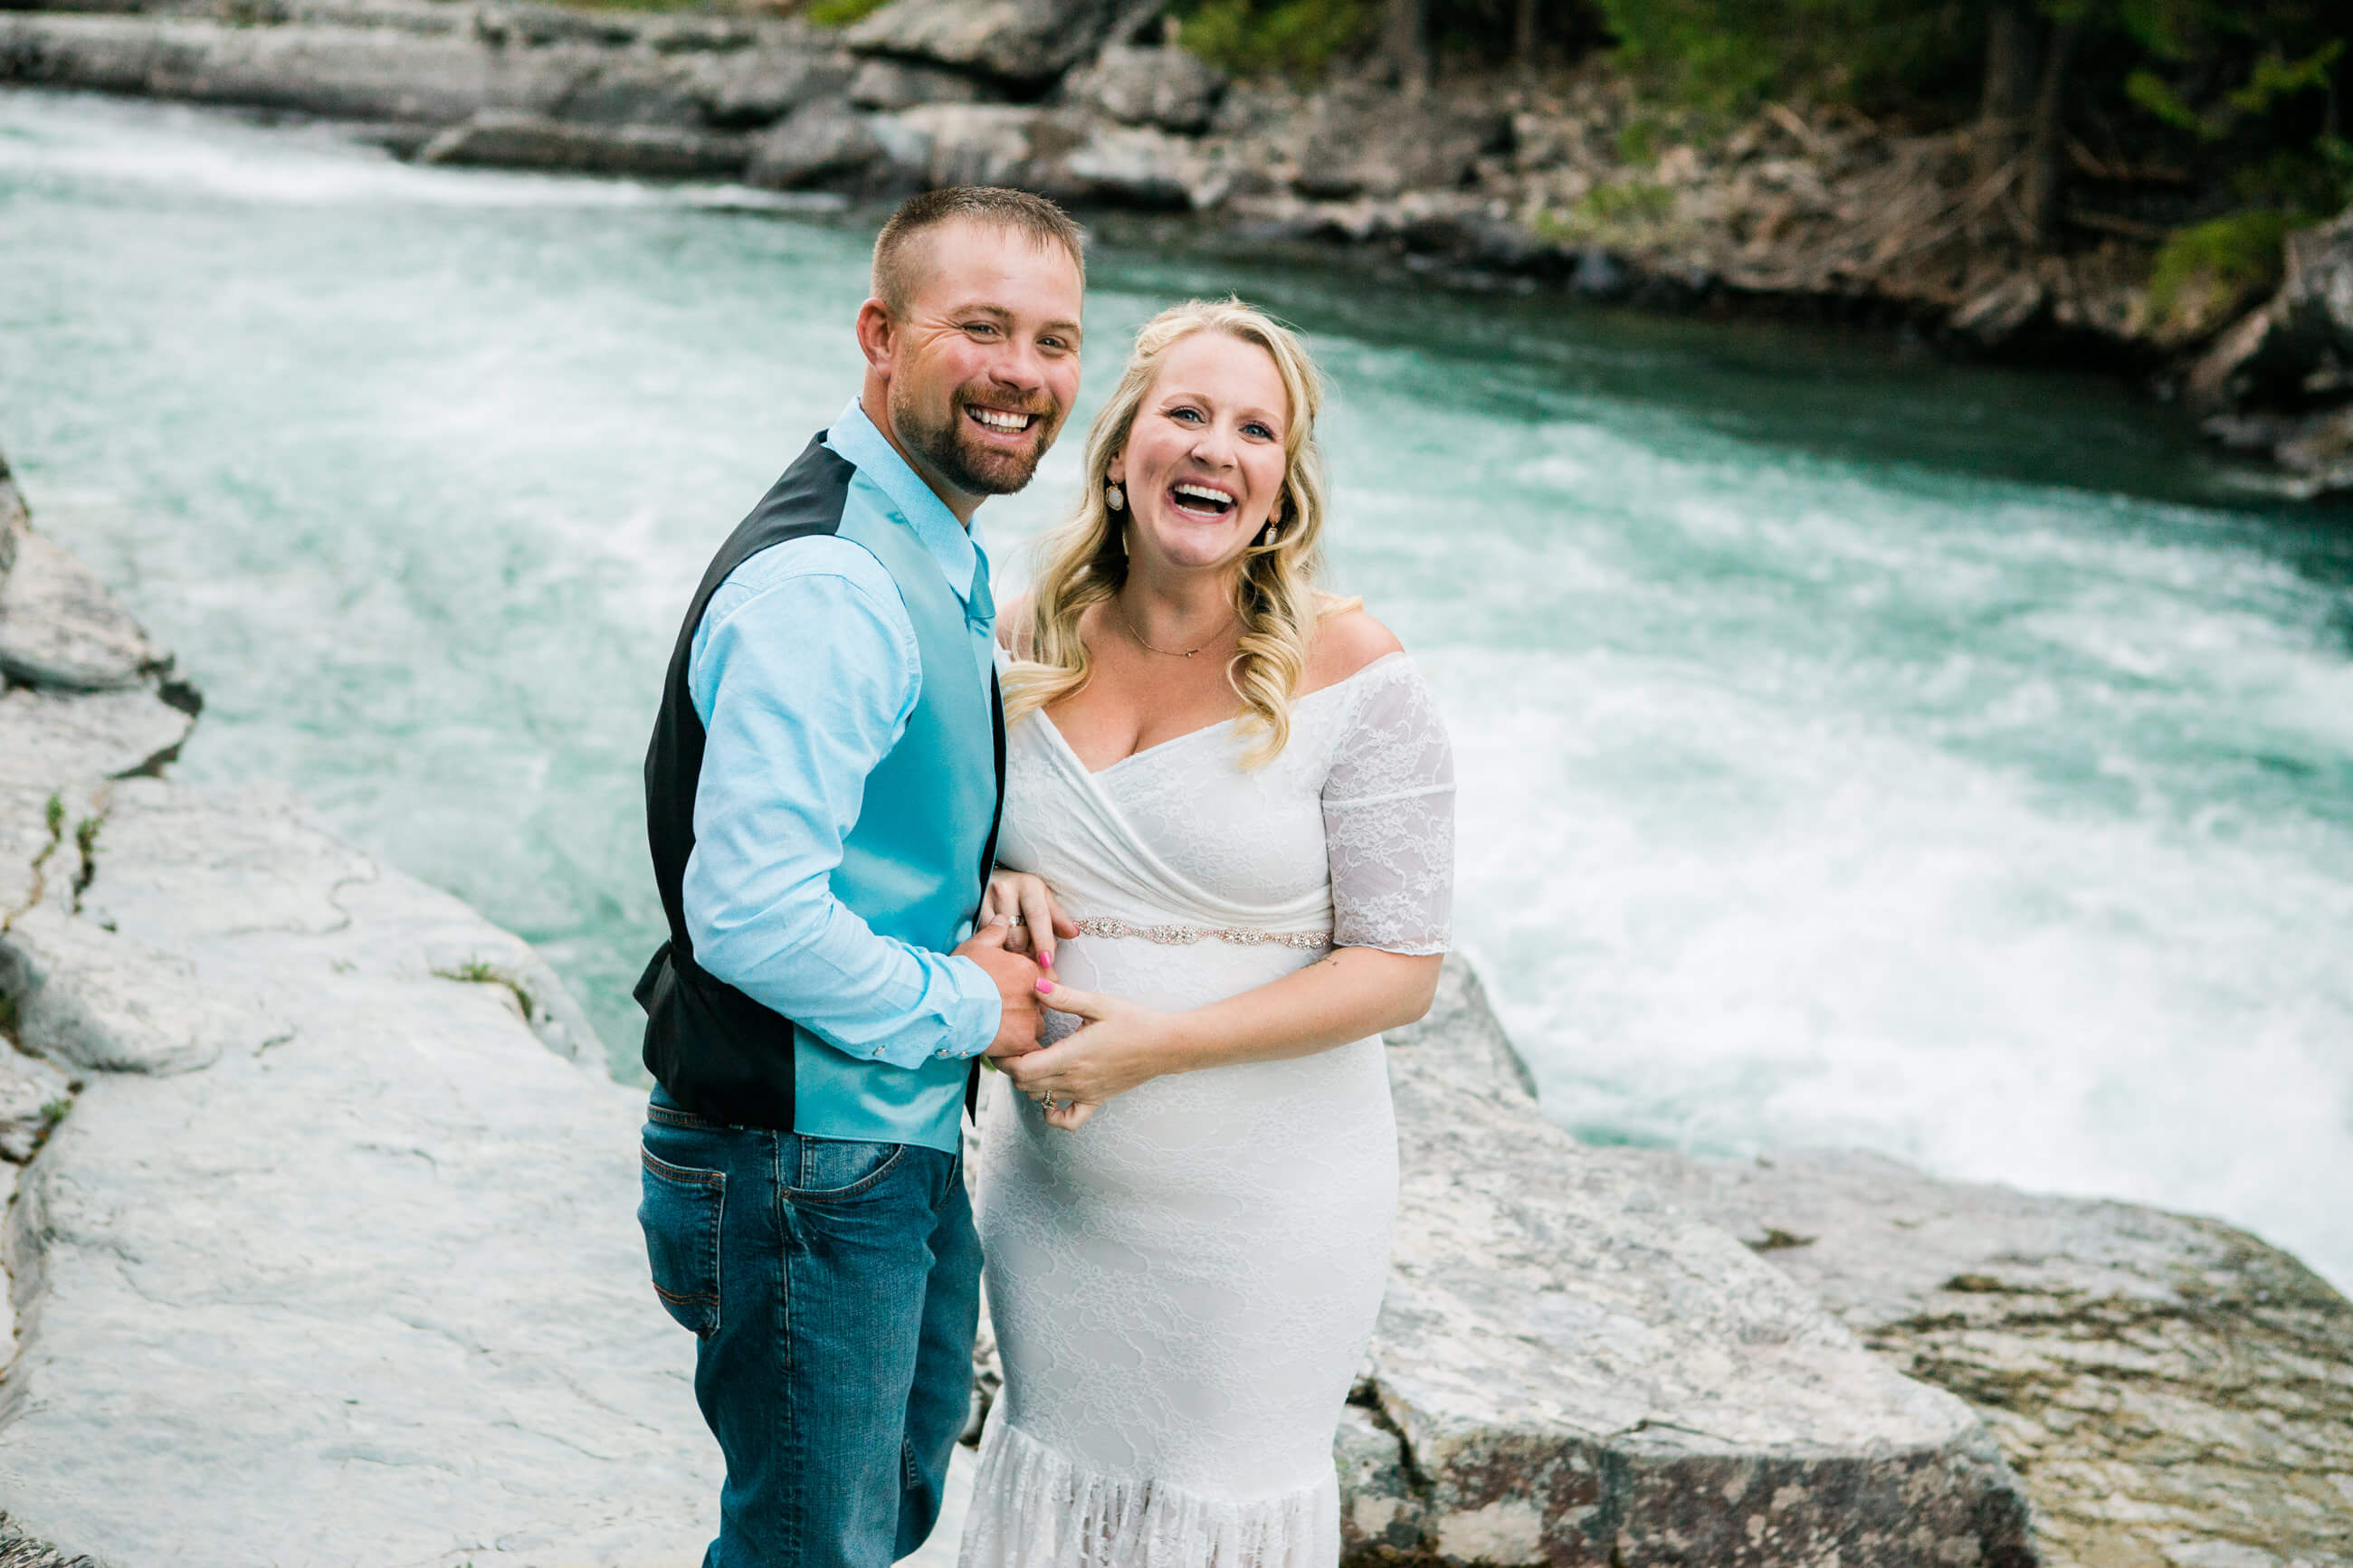 A bride and groom laugh and smile during their elopement in Glacier National Park